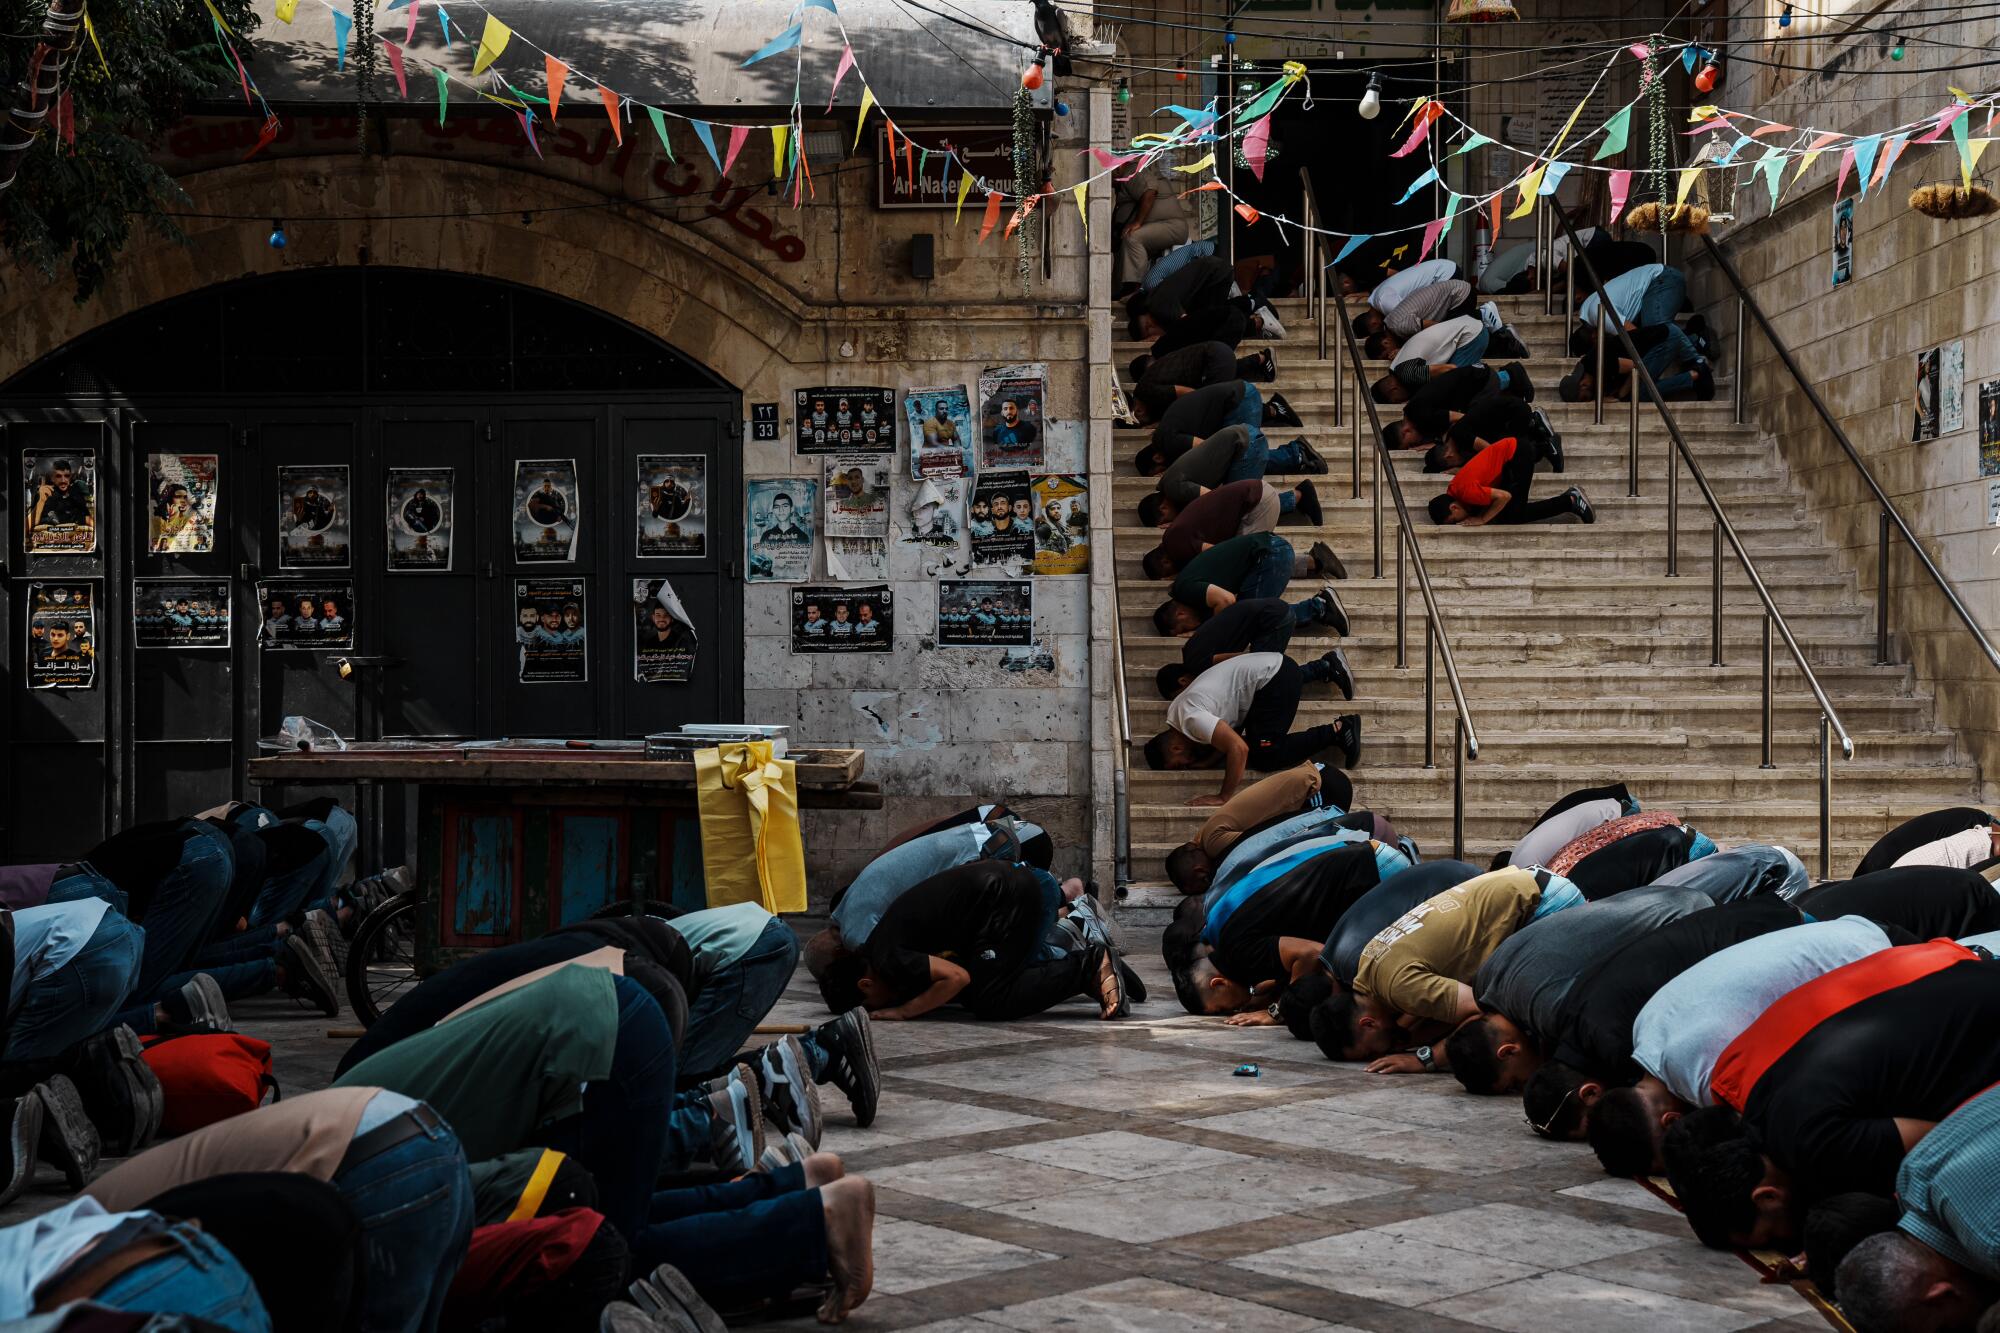 Local residents gather to hold Friday prayers outside the mosque inside the Old City of Nablus.